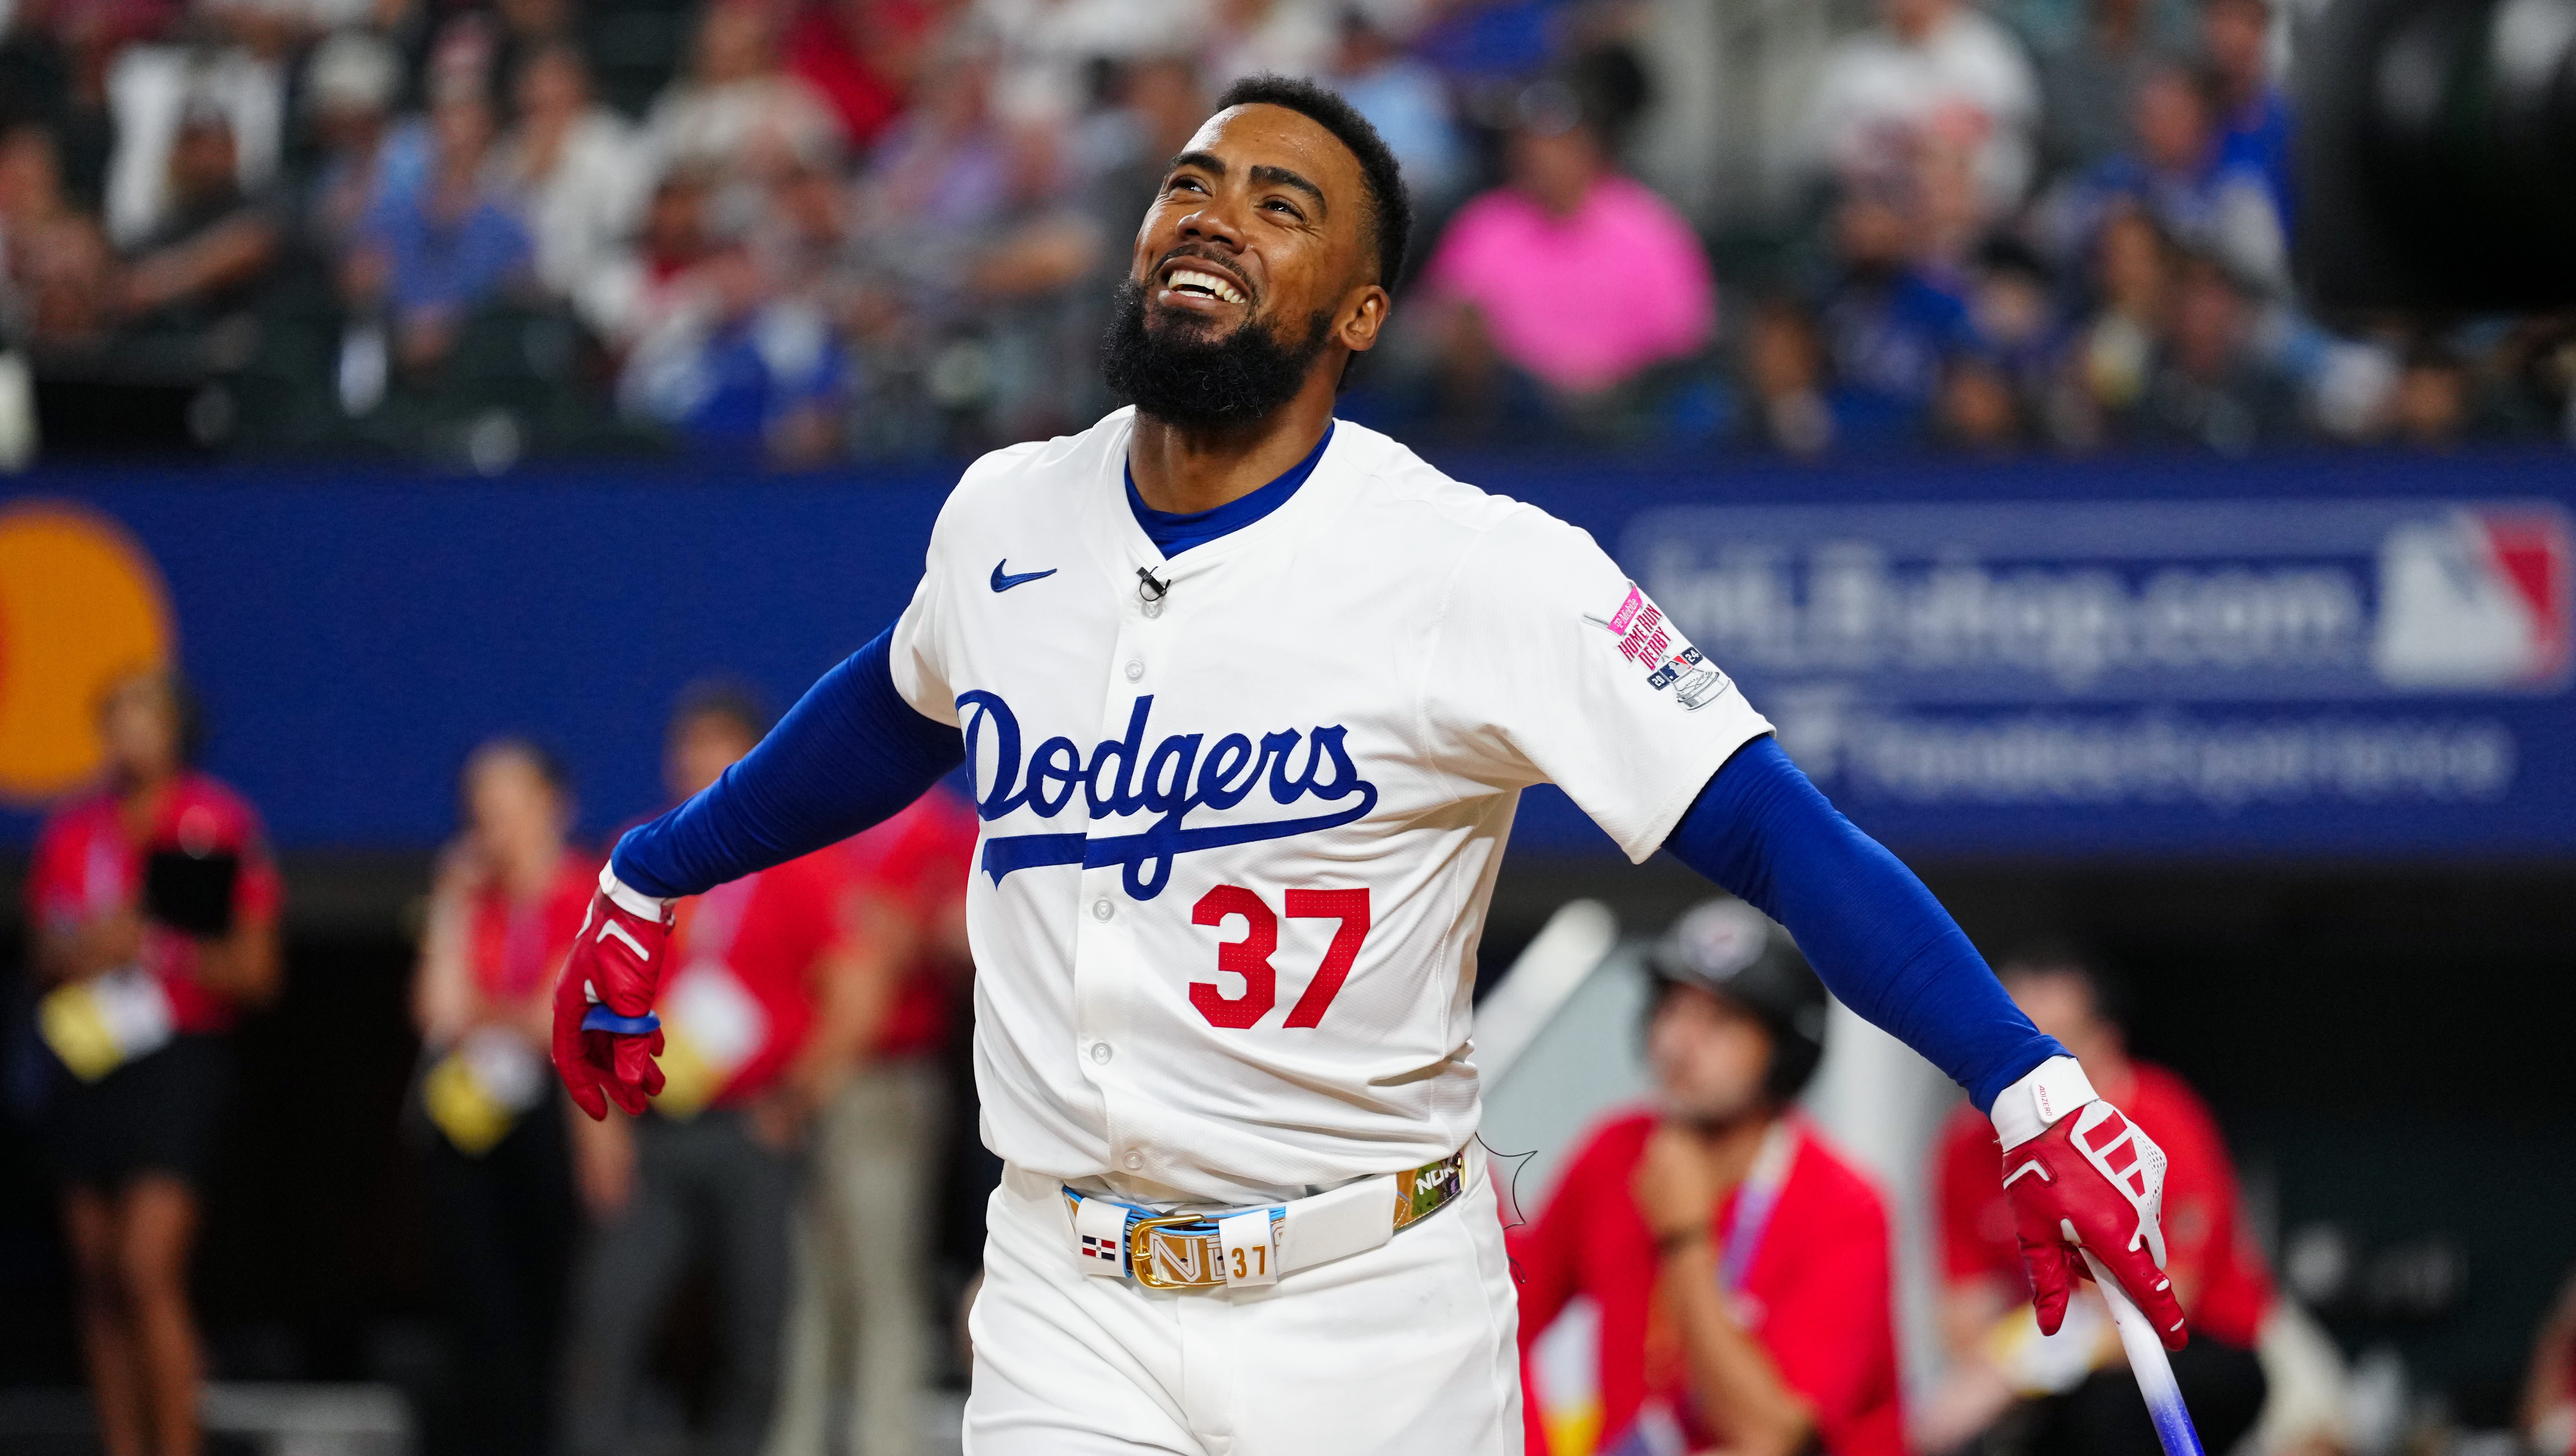 Teoscar Hernandez: 5 Things to Know About the First Dodger to Win the Home Run Derby